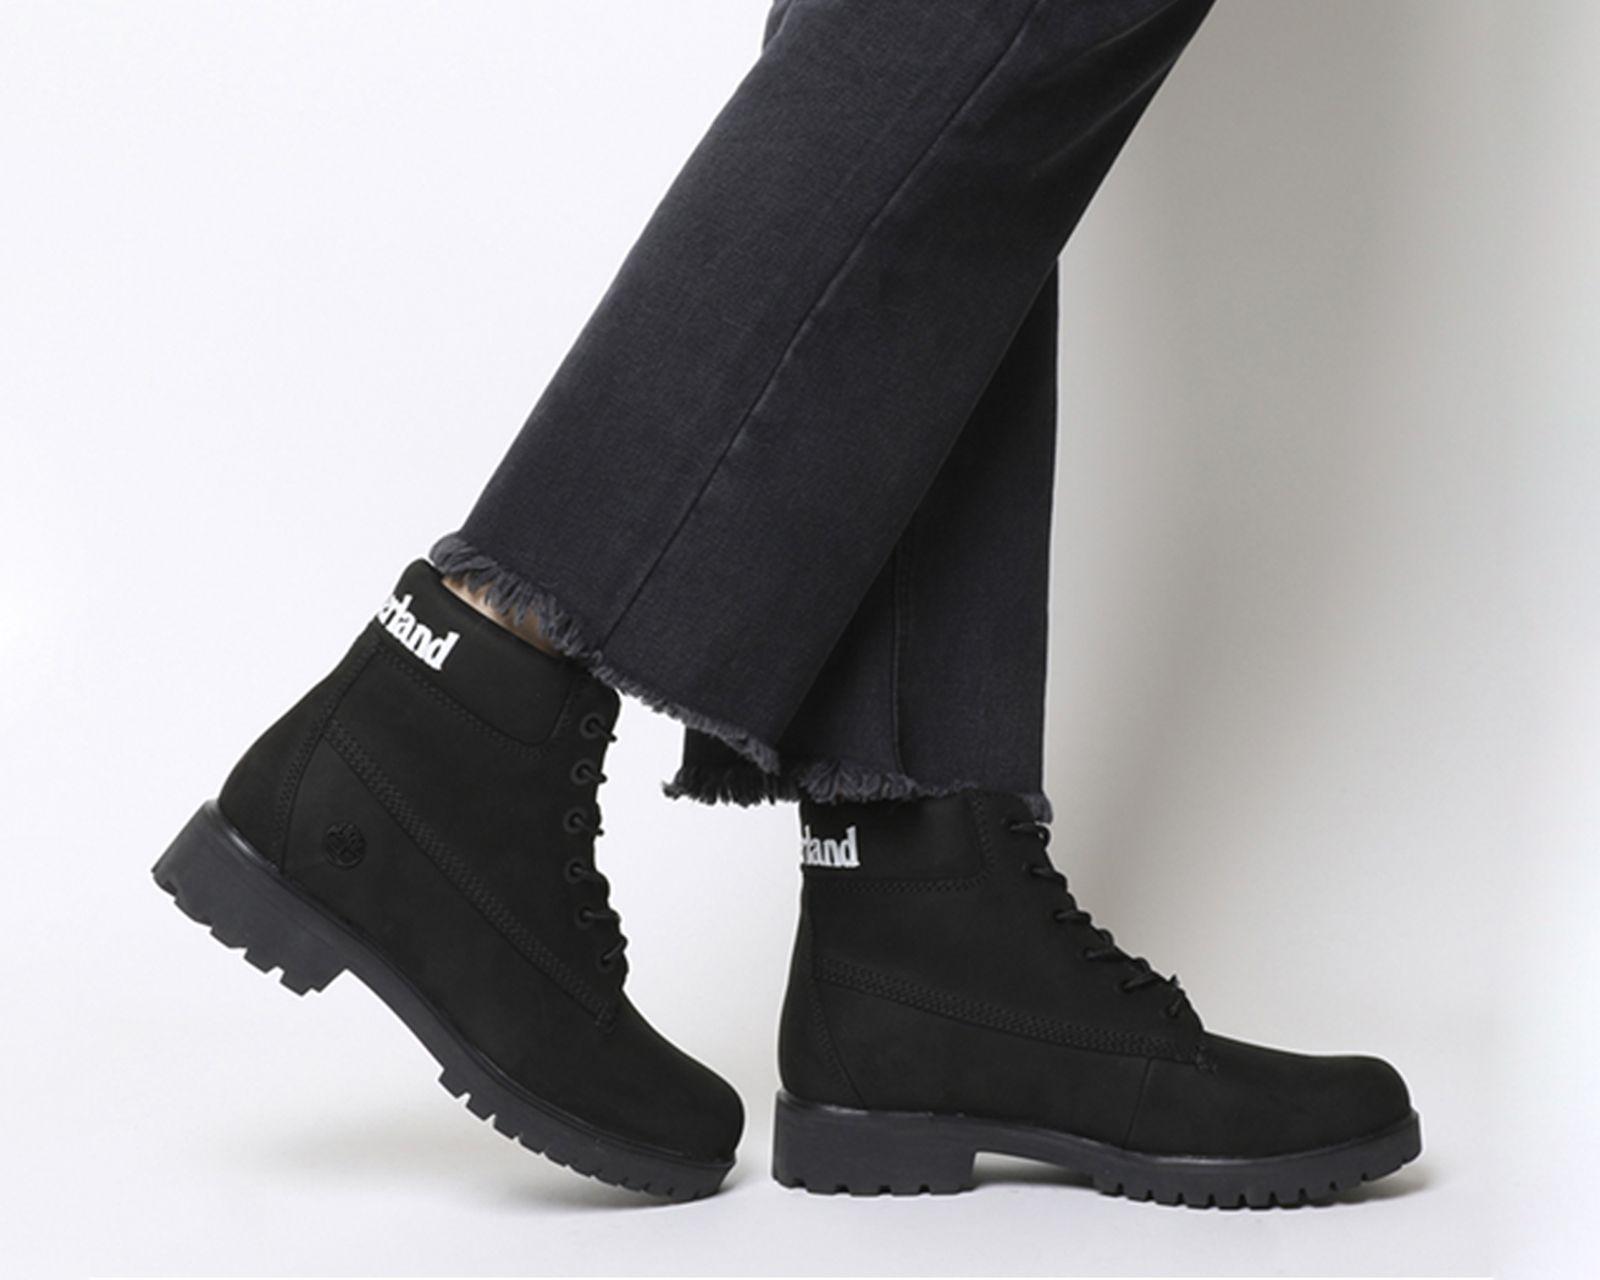 Black Shoe with Wing Logo - Timberland Slim 6 Inch Logo Boots Black